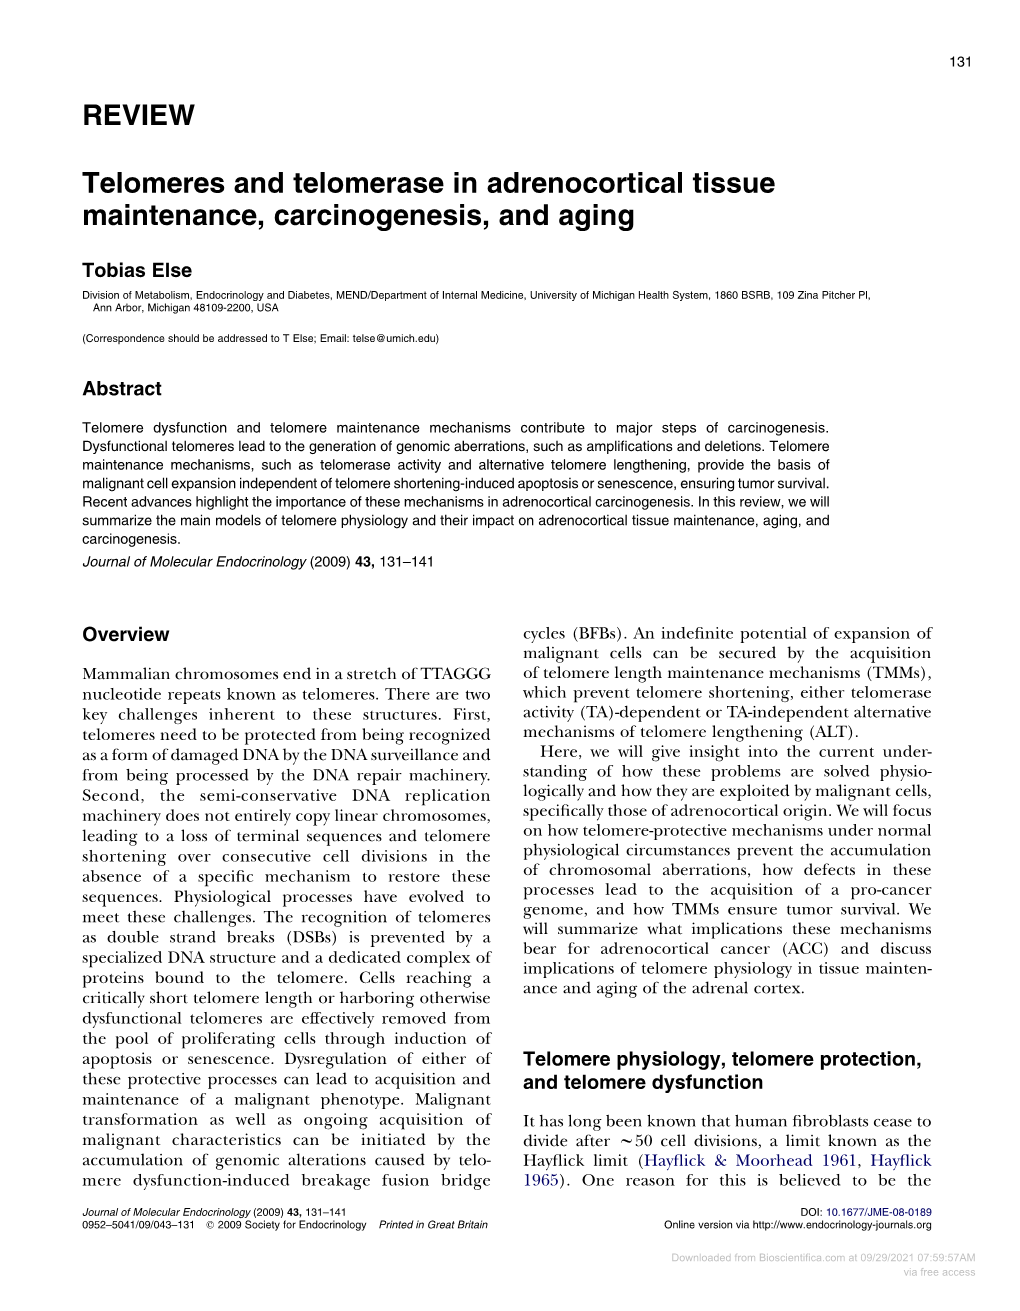 REVIEW Telomeres and Telomerase in Adrenocortical Tissue Maintenance